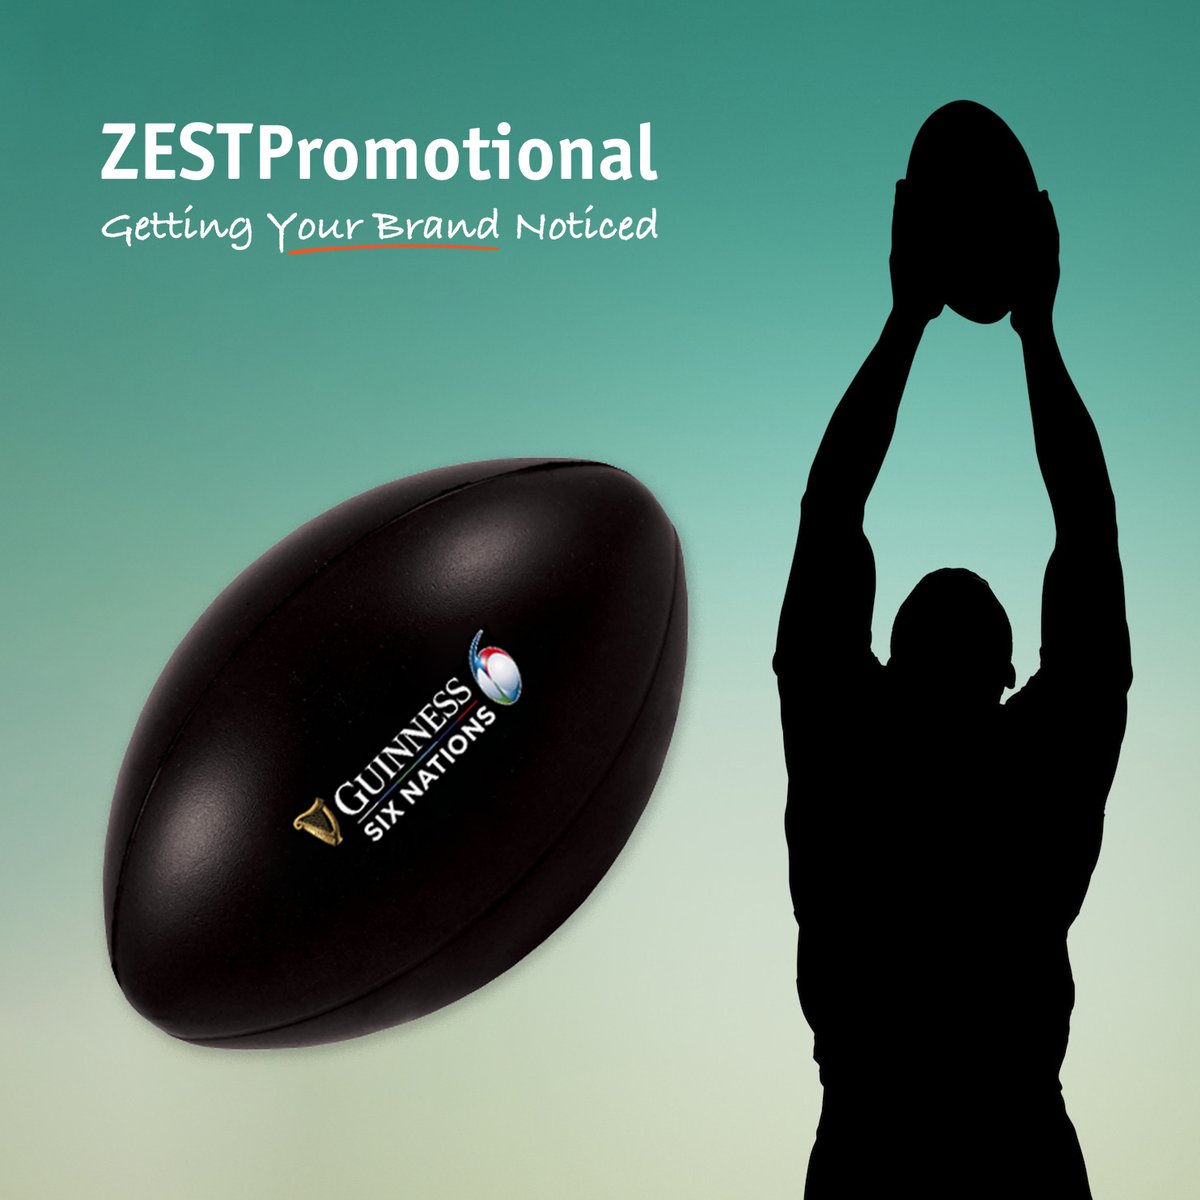 Its just over 2 weeks until the #6Nations begins, keep yourself #StressFree whilst watching the #Rugby with these #RugbyBall shaped #StressBalls 🏉

#🏉 #Guiness6Nations #6Nations2023 #RugbyUnion